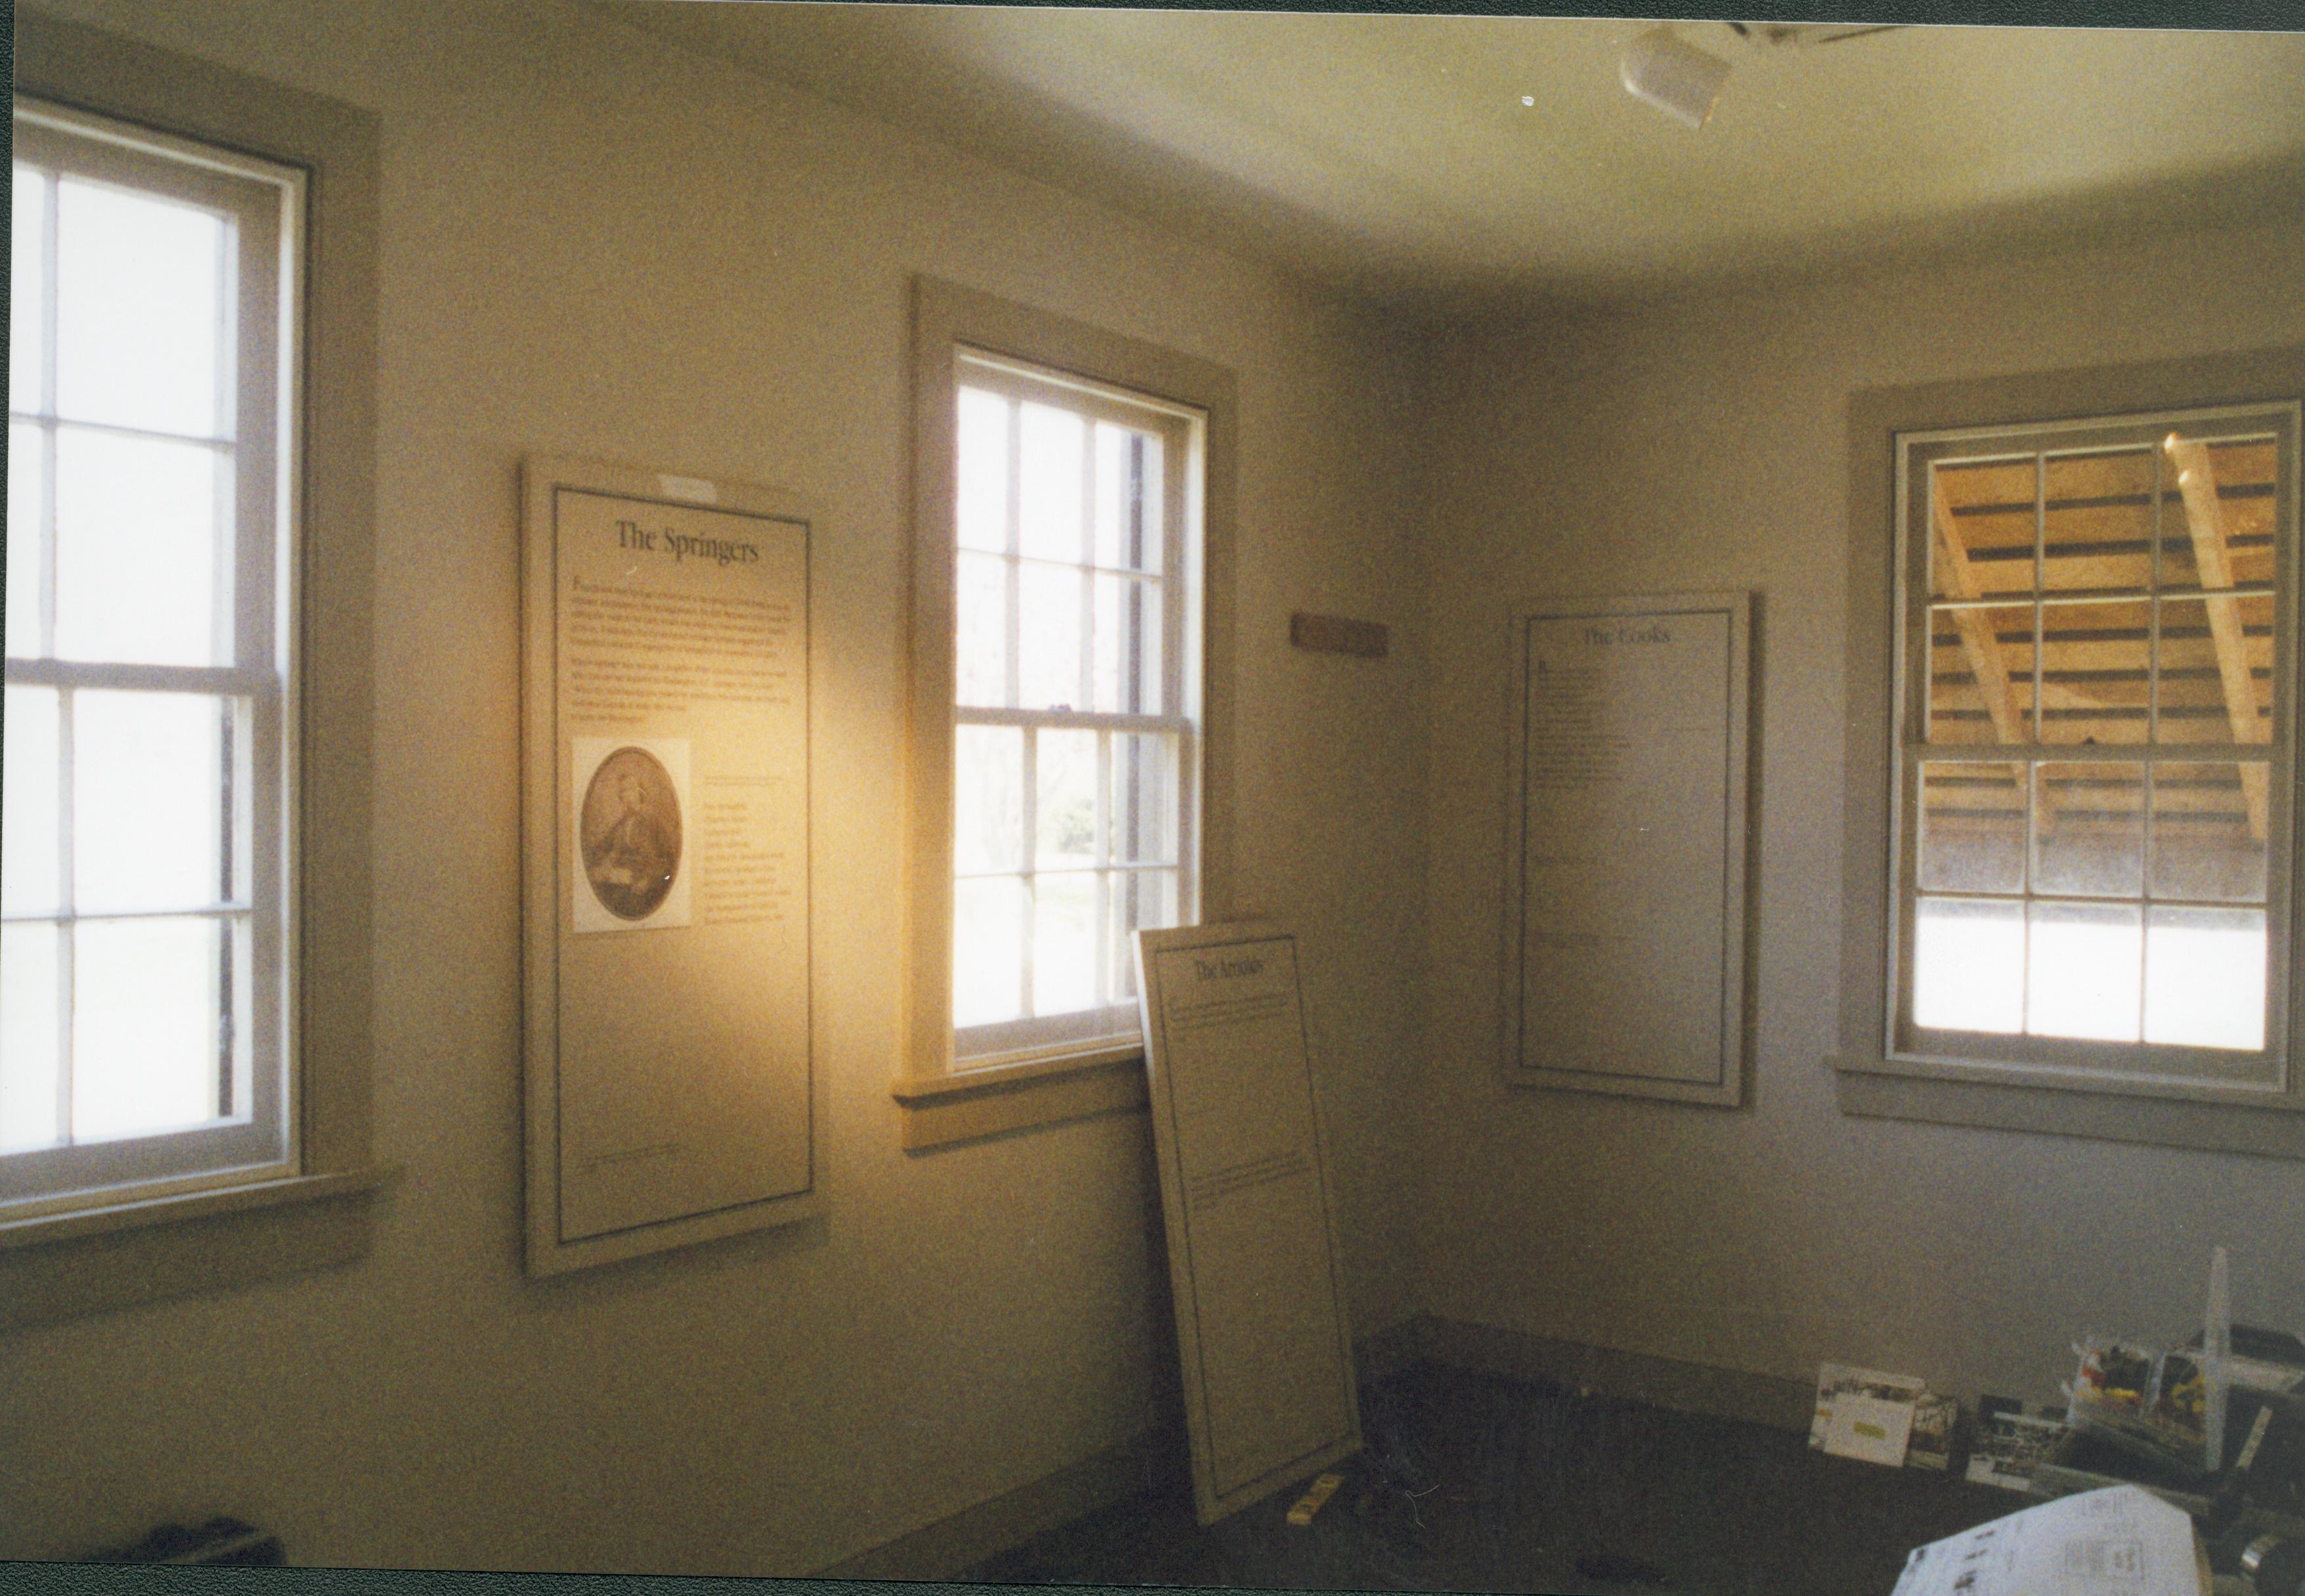 Room 103, Penels going up LIHO NHS- Arnold House Exhibit, Roll 2001-3, exp 25 Arnold House, exhibit